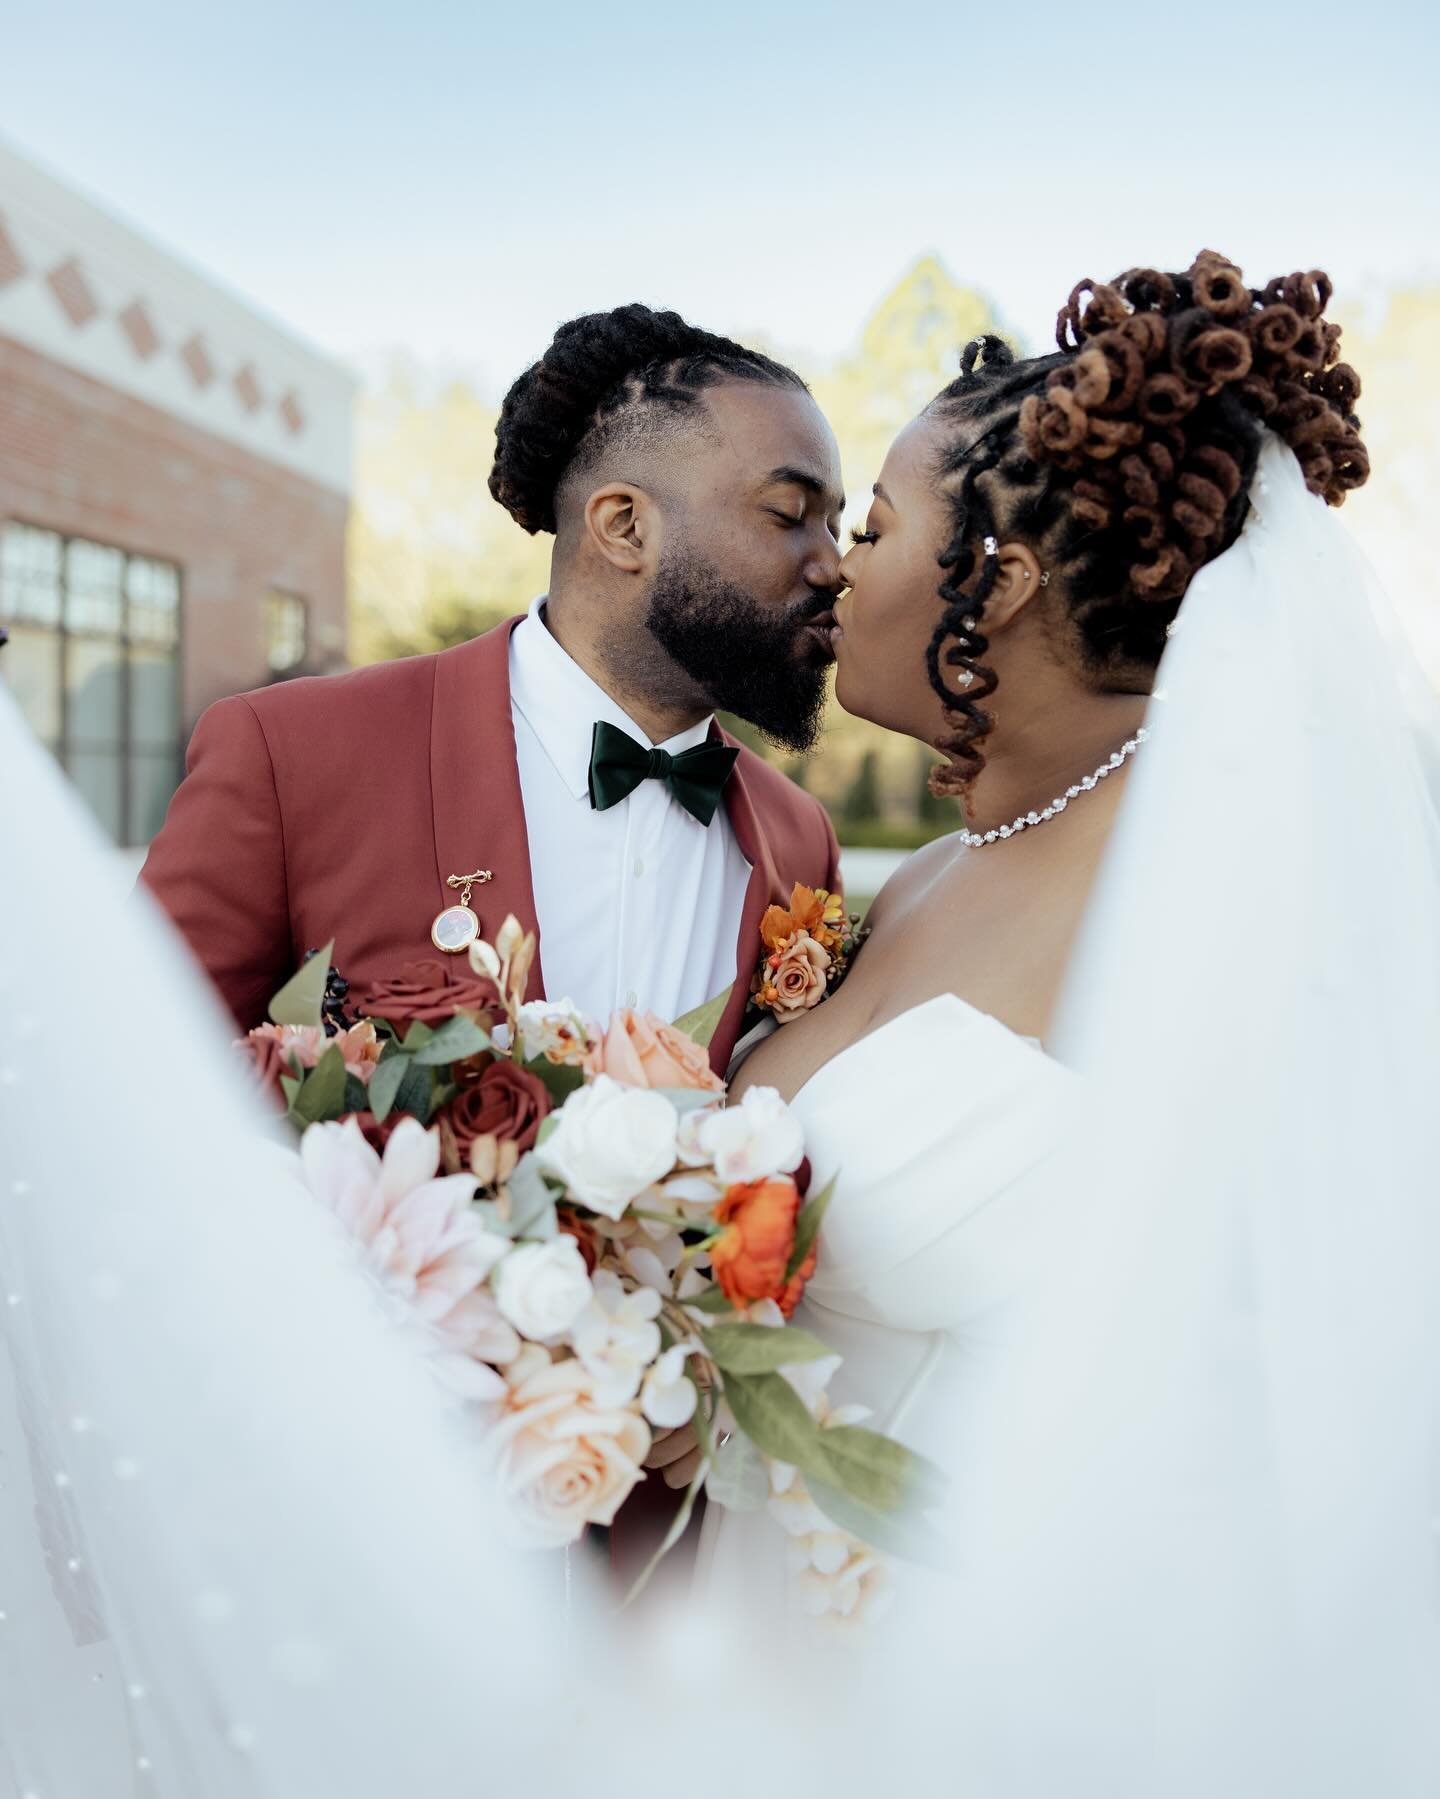 An unforgettable day filled with love, laughter and cherished memories. T &amp; E&rsquo;s day was nothing short of amazing. We are so honored to be part of it!🤍🤍

Videographer: @valcinemaweddings 
Venue/planning/decor: @crystalballroomcharlotte 
Ma